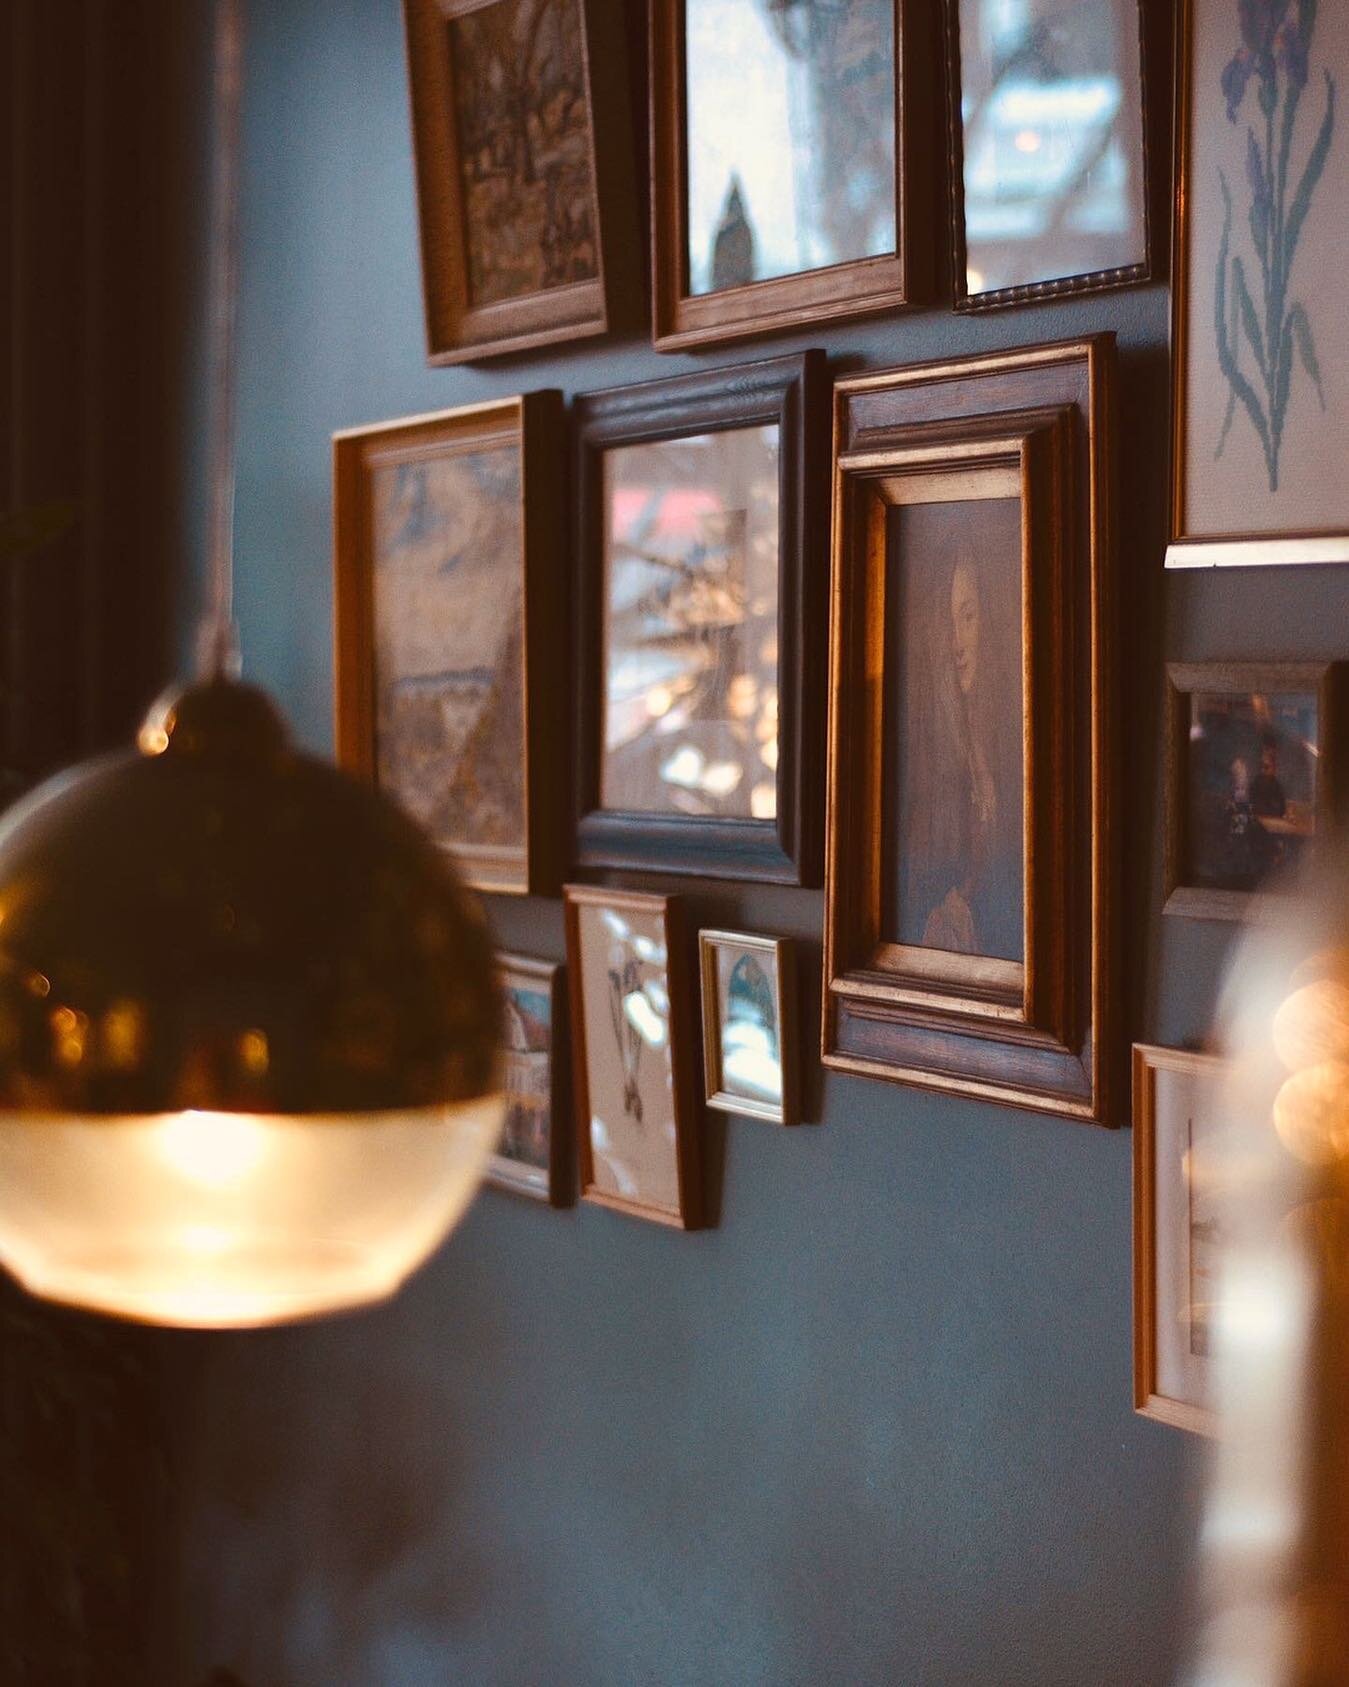 Enhanced Comfort: Colors, textures, and lighting can profoundly influence our mood and well-being.

Here&rsquo;s a cozy detail of one of our restaurant projects in Stockholm @varpizza. With handpicked re-used lamps and art wall, making it as sustaina